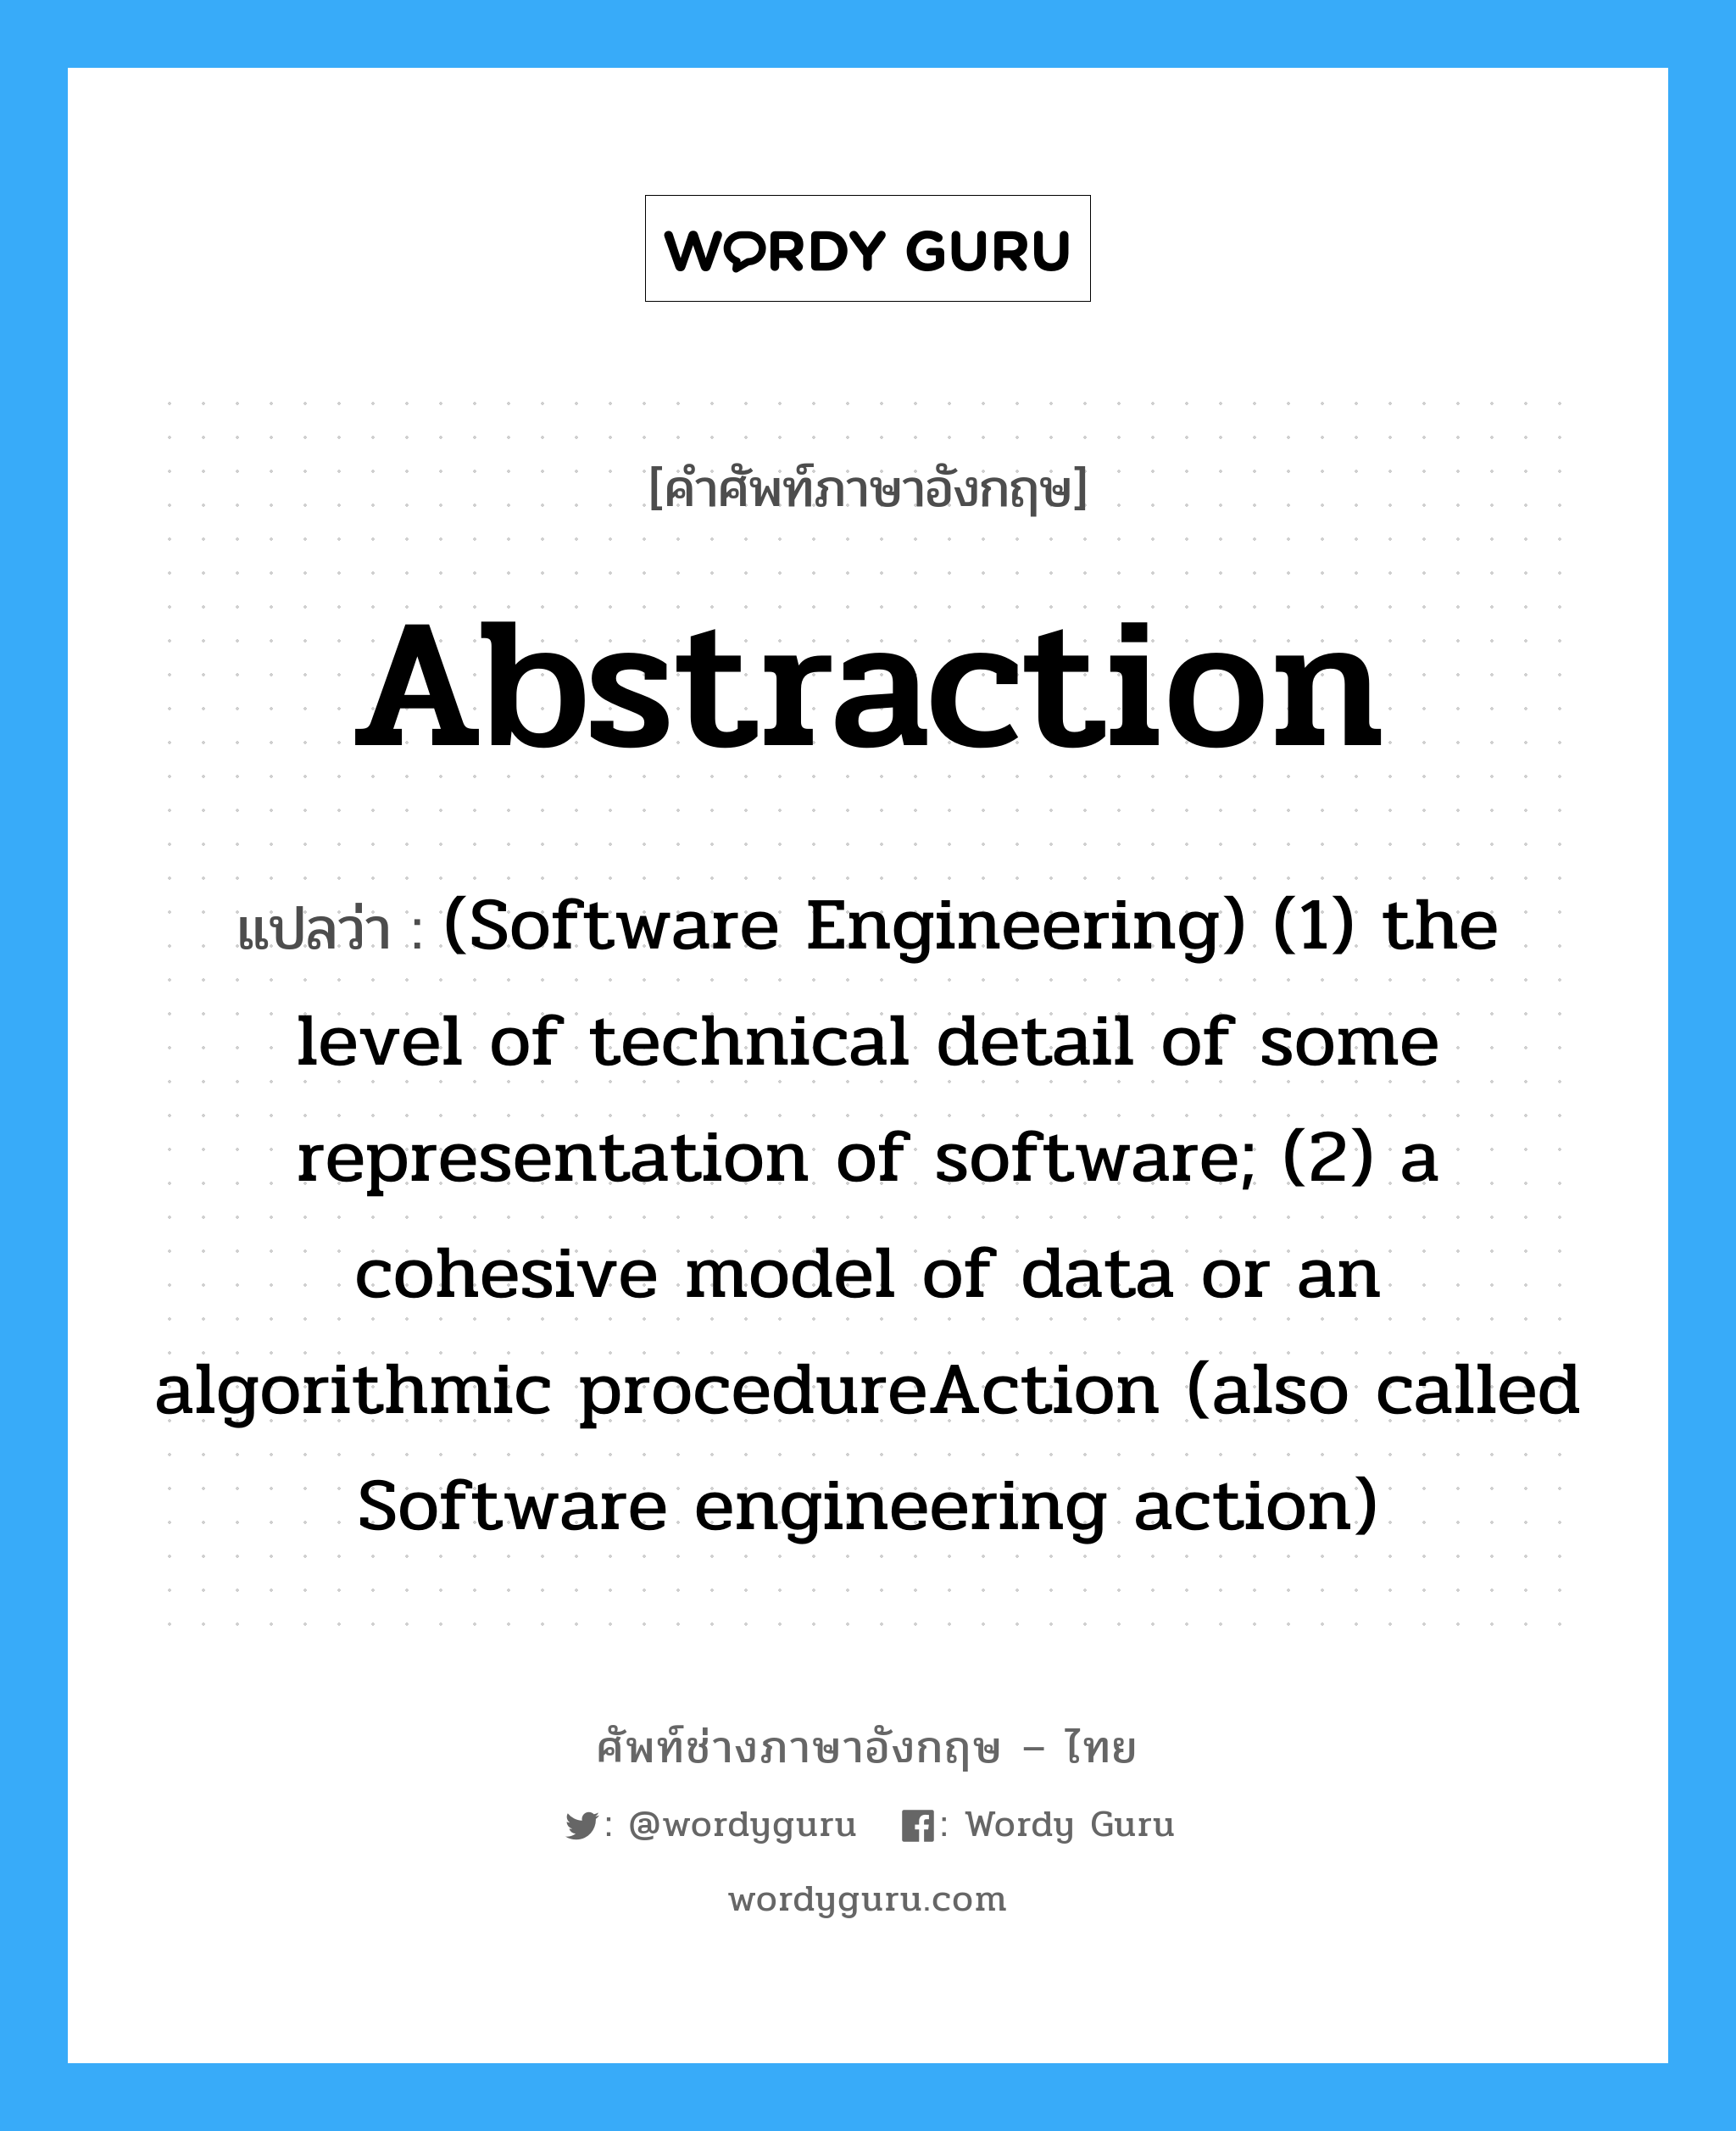 Abstraction แปลว่า?, คำศัพท์ช่างภาษาอังกฤษ - ไทย Abstraction คำศัพท์ภาษาอังกฤษ Abstraction แปลว่า (Software Engineering) (1) the level of technical detail of some representation of software; (2) a cohesive model of data or an algorithmic procedureAction (also called Software engineering action)